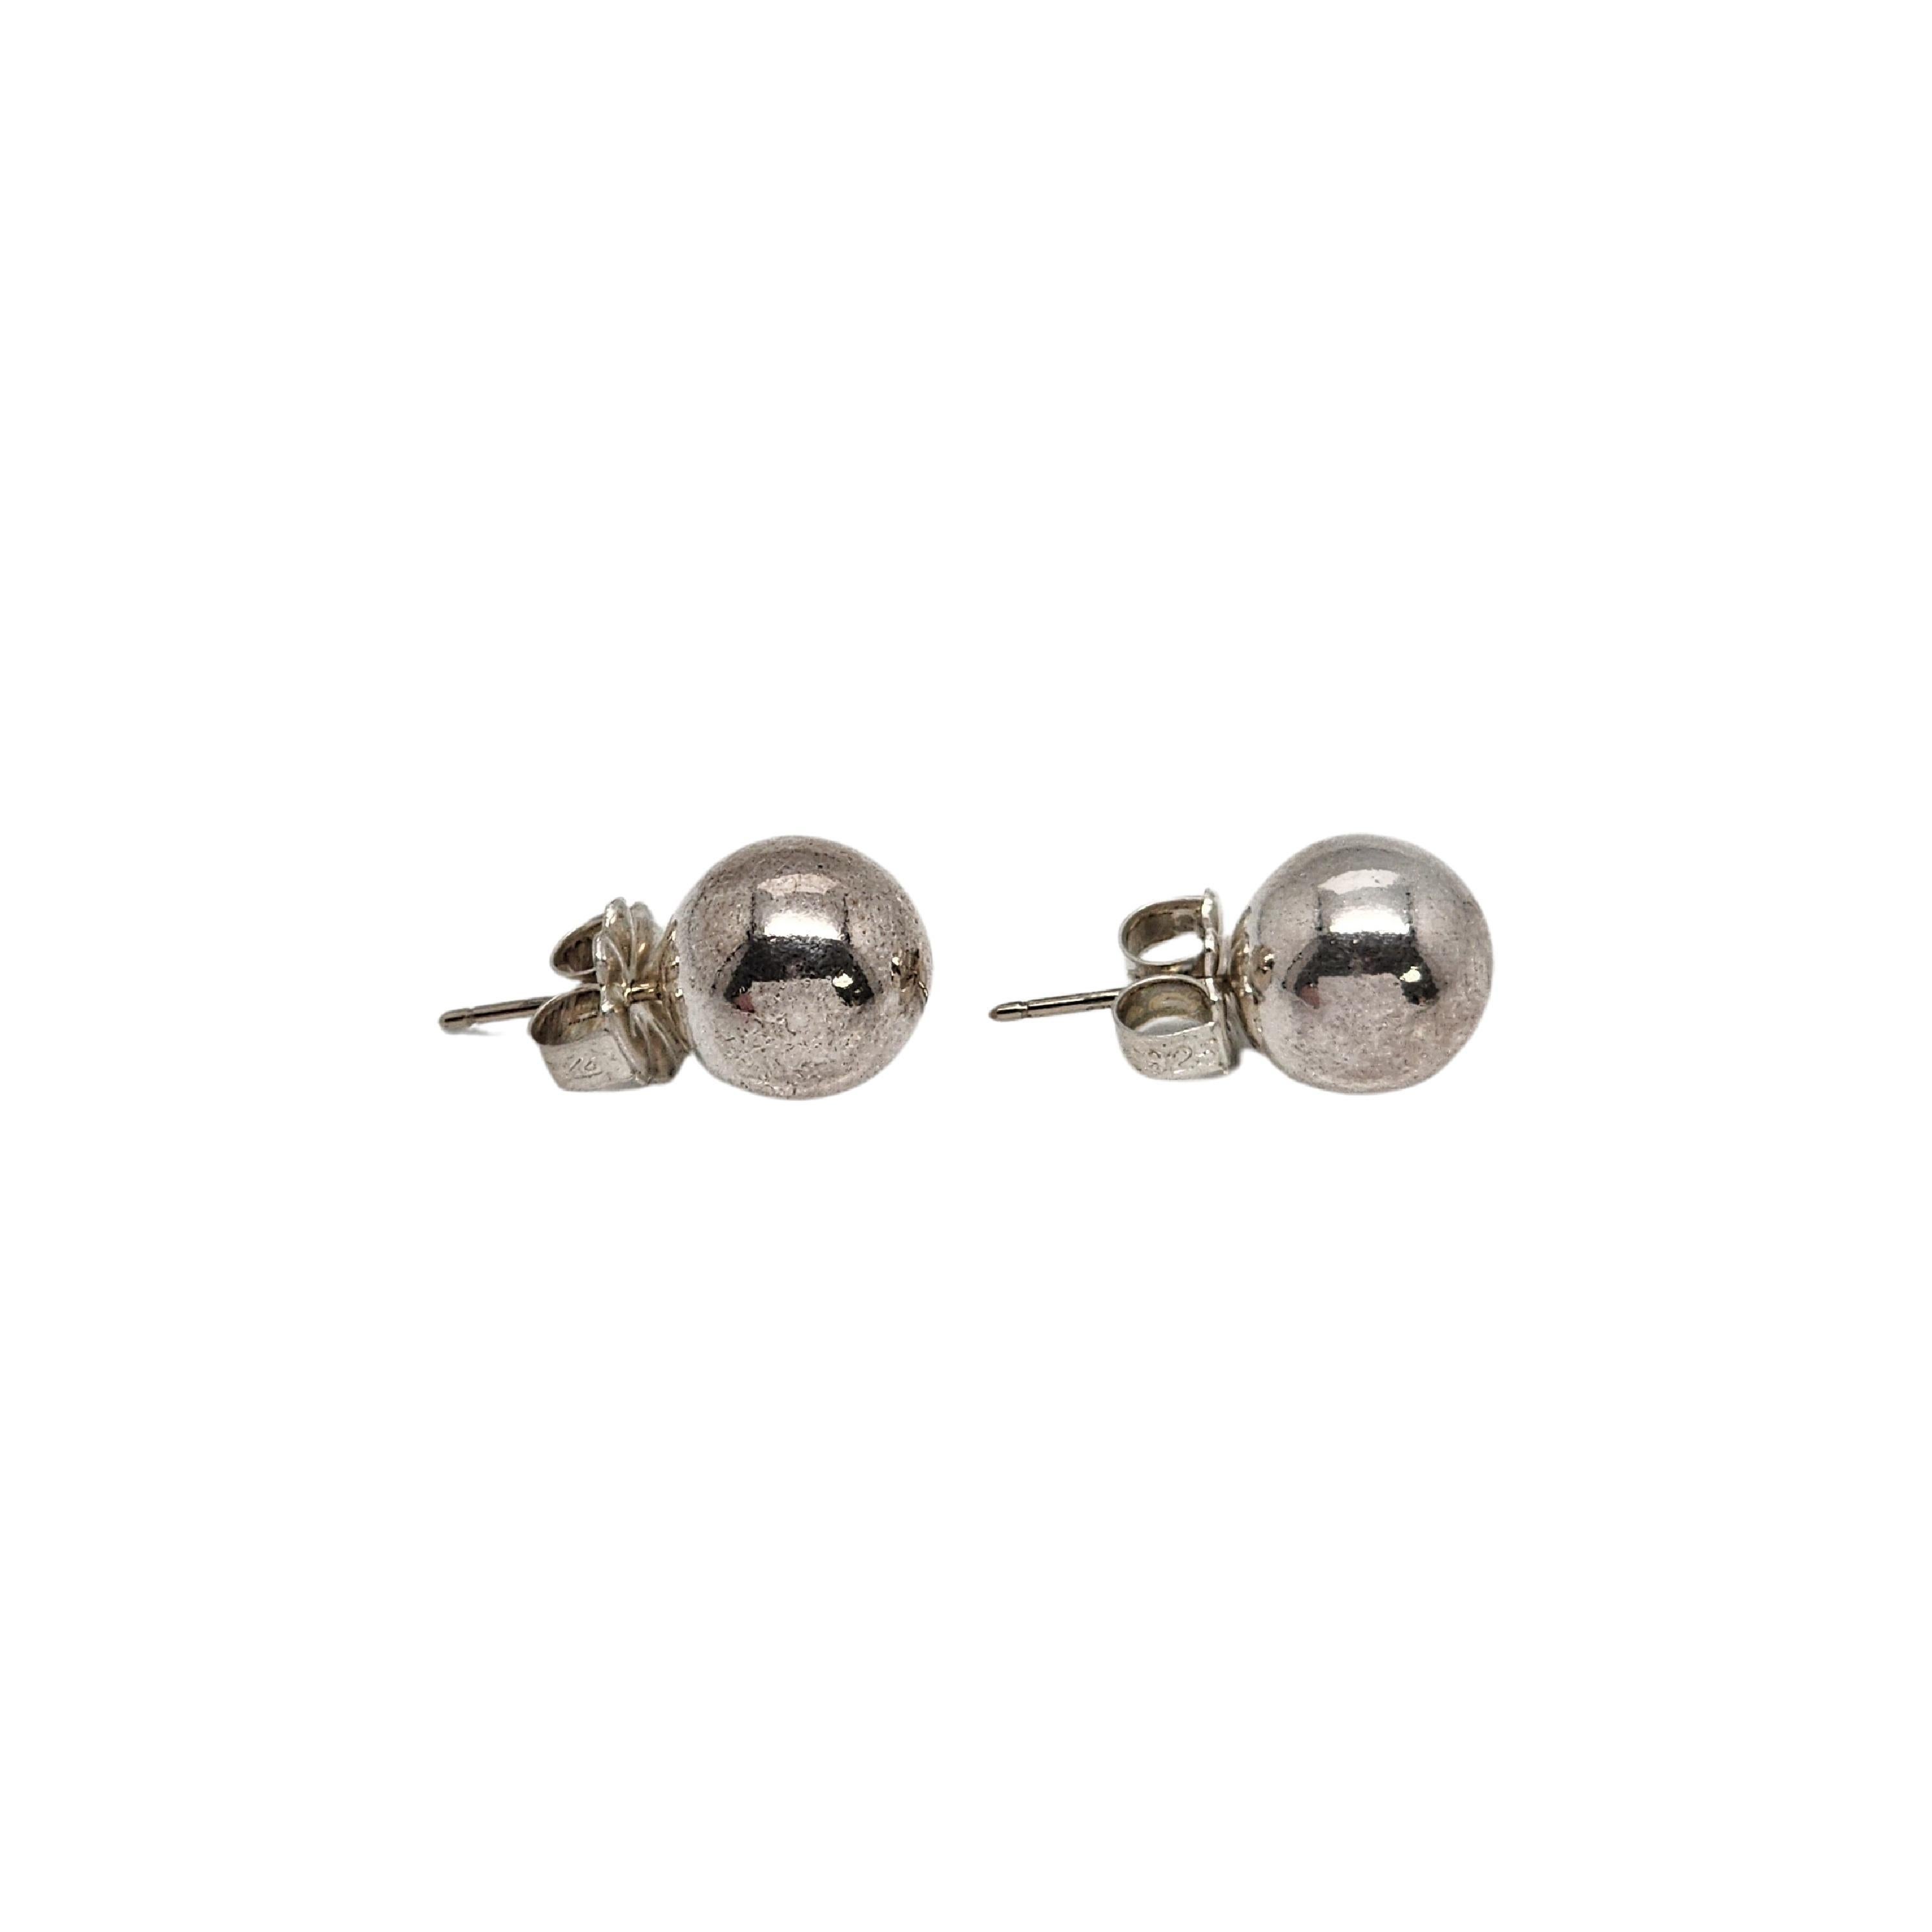 Tiffany & Co Sterling Silver Ball Stud Earrings #16406 In Good Condition For Sale In Washington Depot, CT